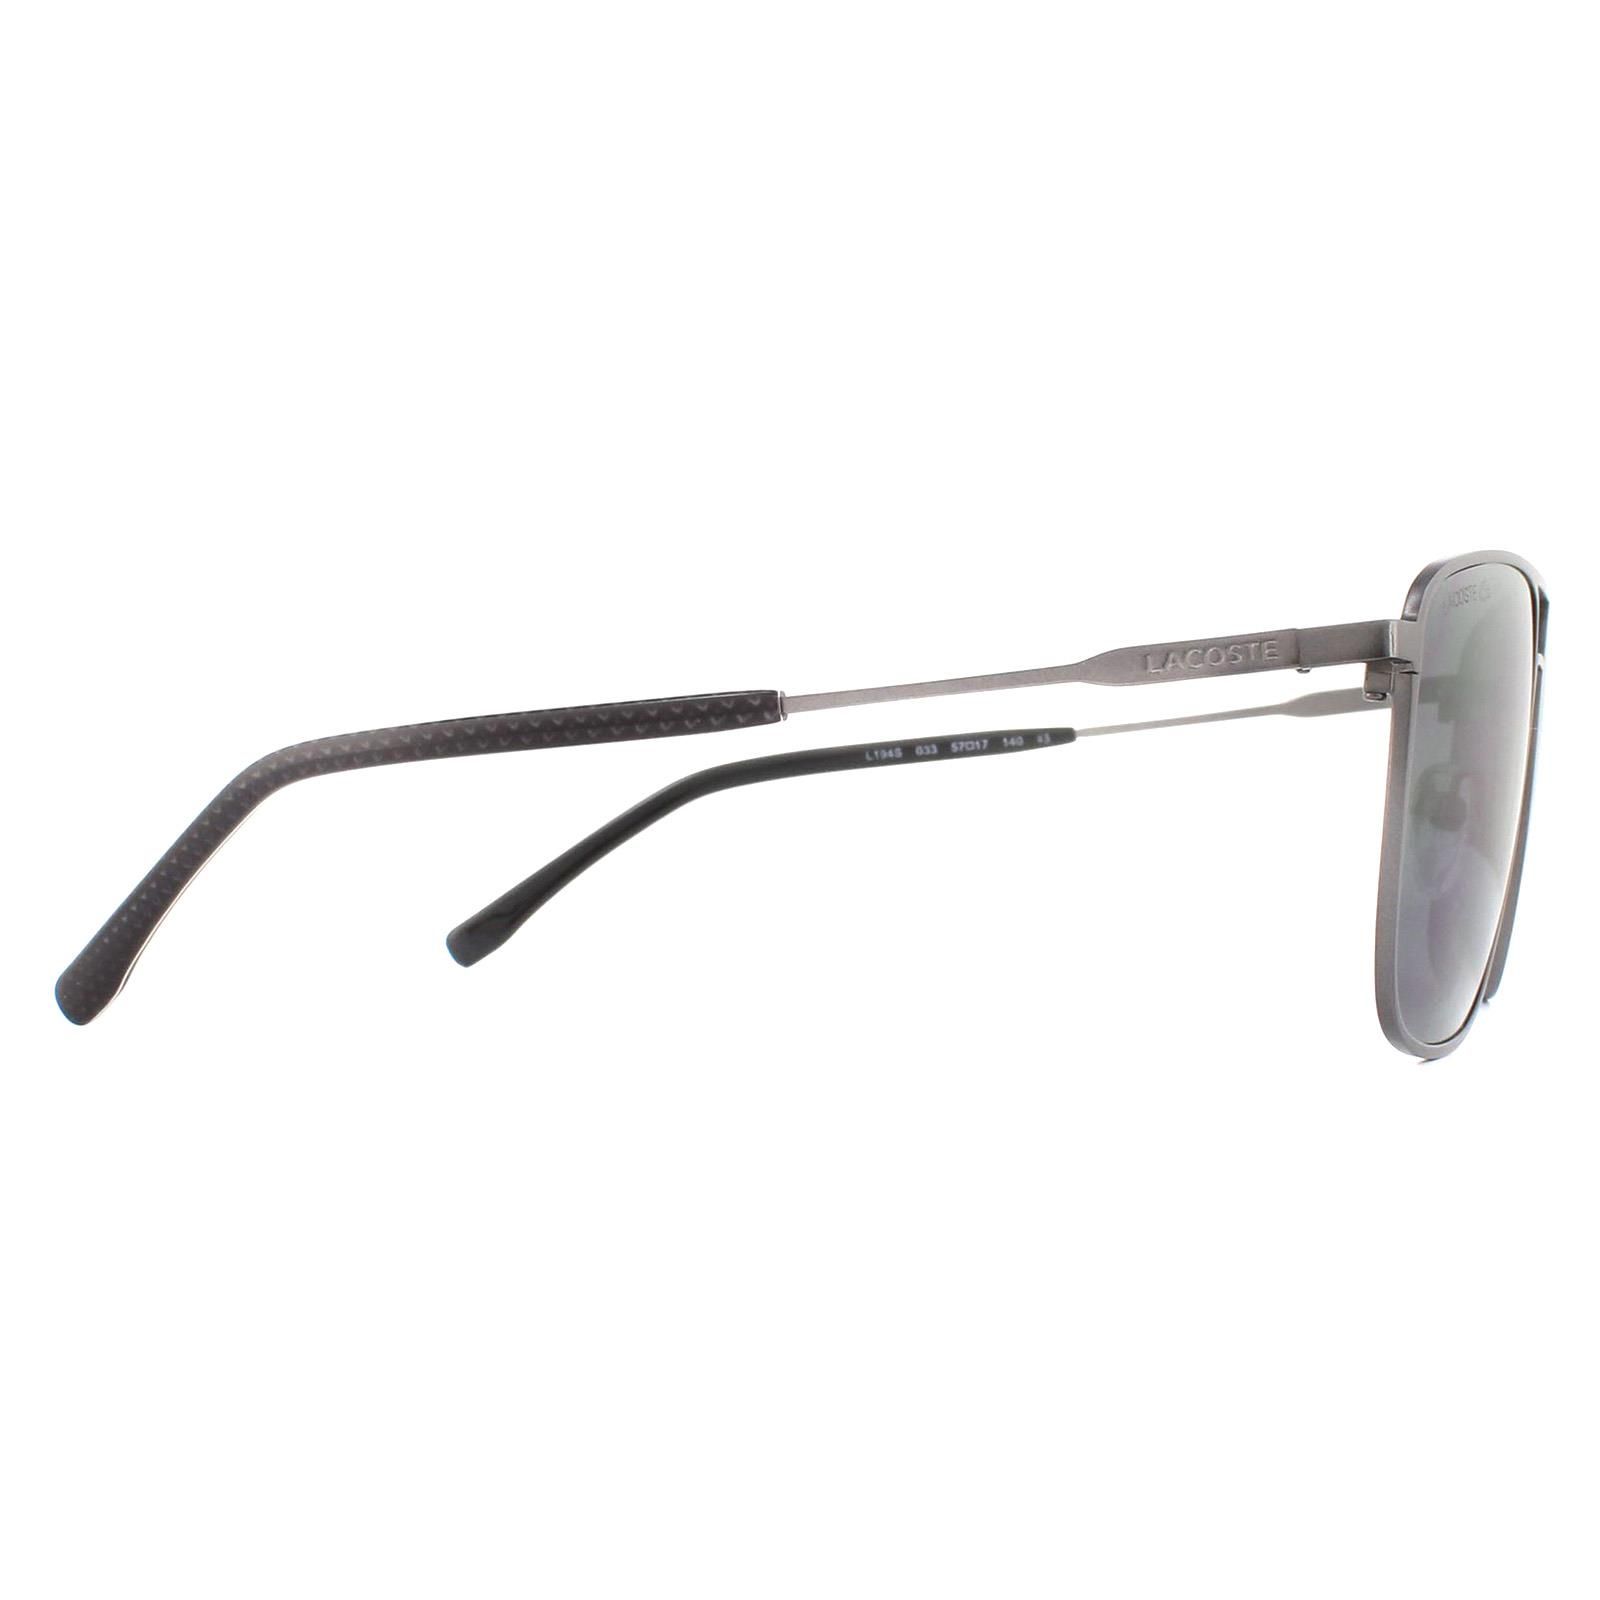 Lacoste Sunglasses L194S 033 Matte Gunmetal Grey are a squared off aviator style with a flat look to the front and lettered Lacoste logo at the temples.